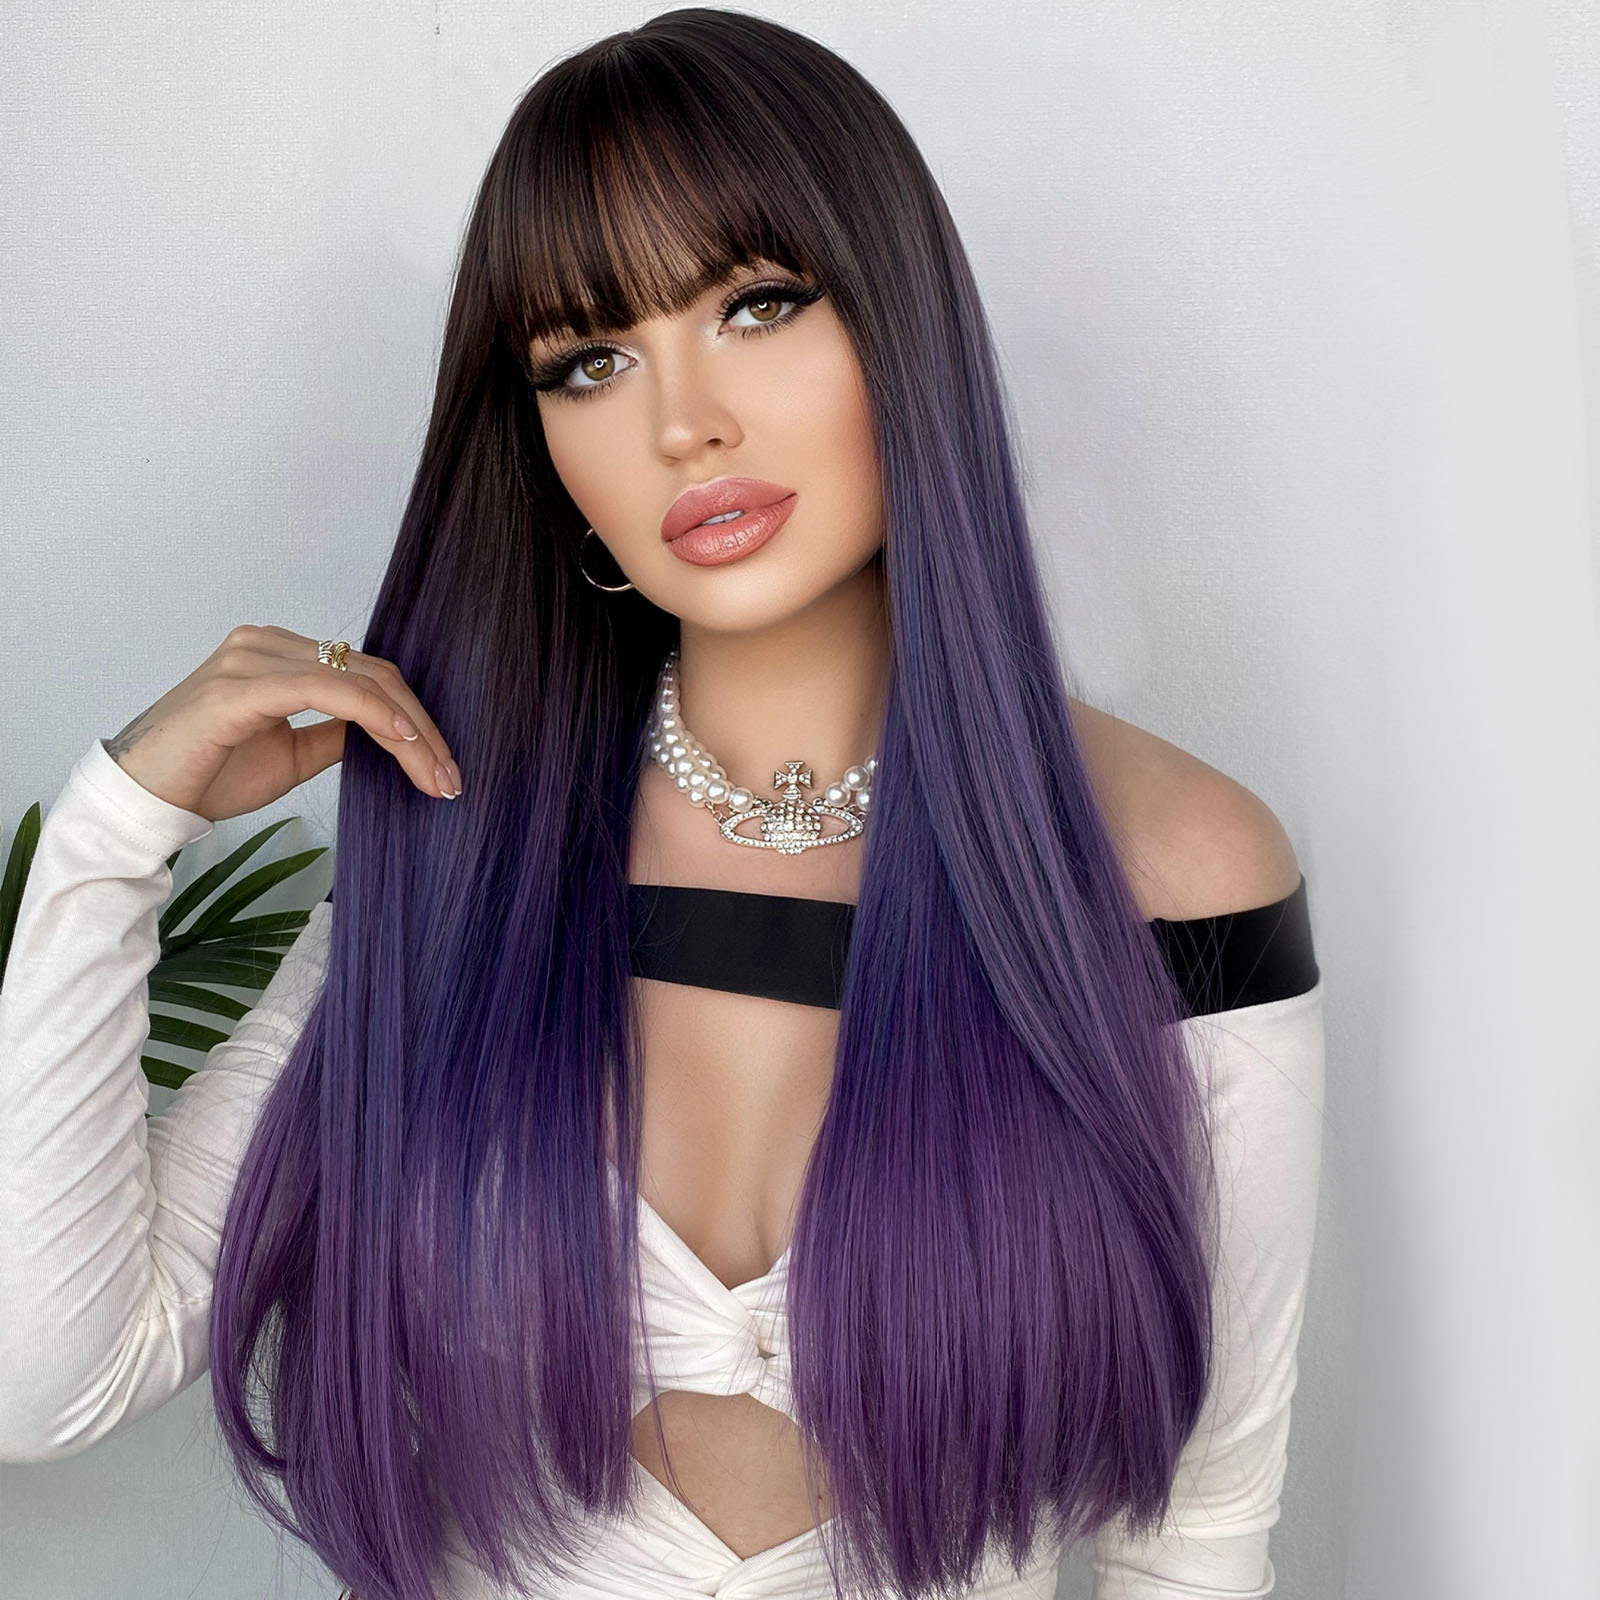 Yinraohair synthetic wig in stylish Barbie brown purple color, with long straight hair and bangs, ready to go